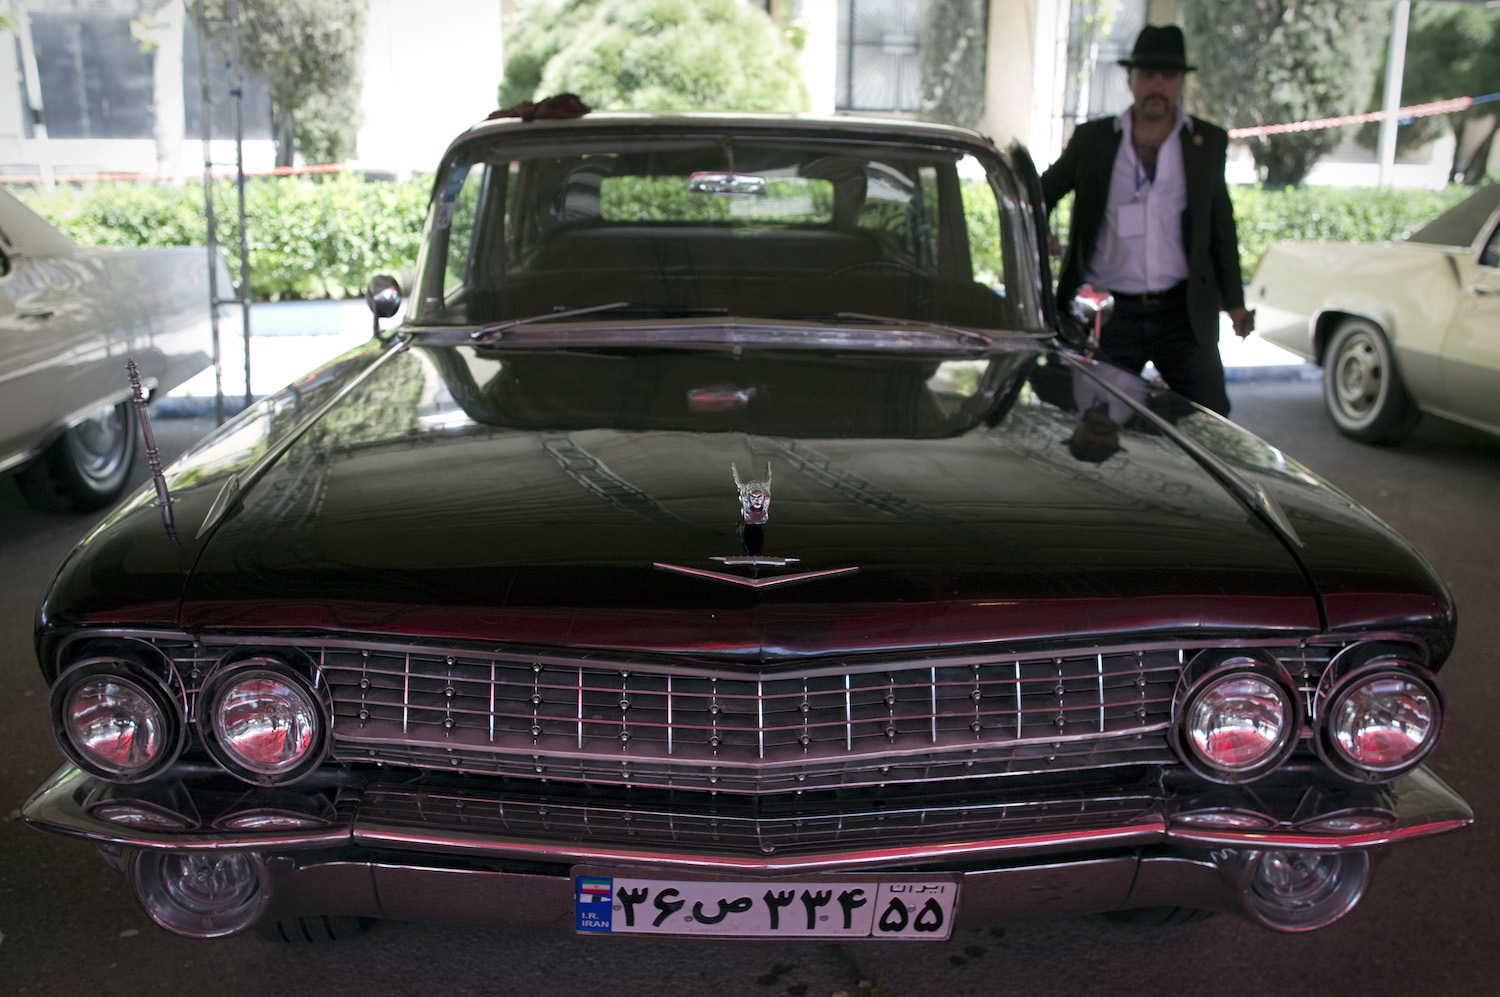 1960 Cadillac Fleetwood. A 1962 Cadillac series 75 Fleetwood was one of The Many Classic Cars in The Many Saints of Newark Sopranos prequel film. | BEHROUZ MEHRI/AFP via Getty Images